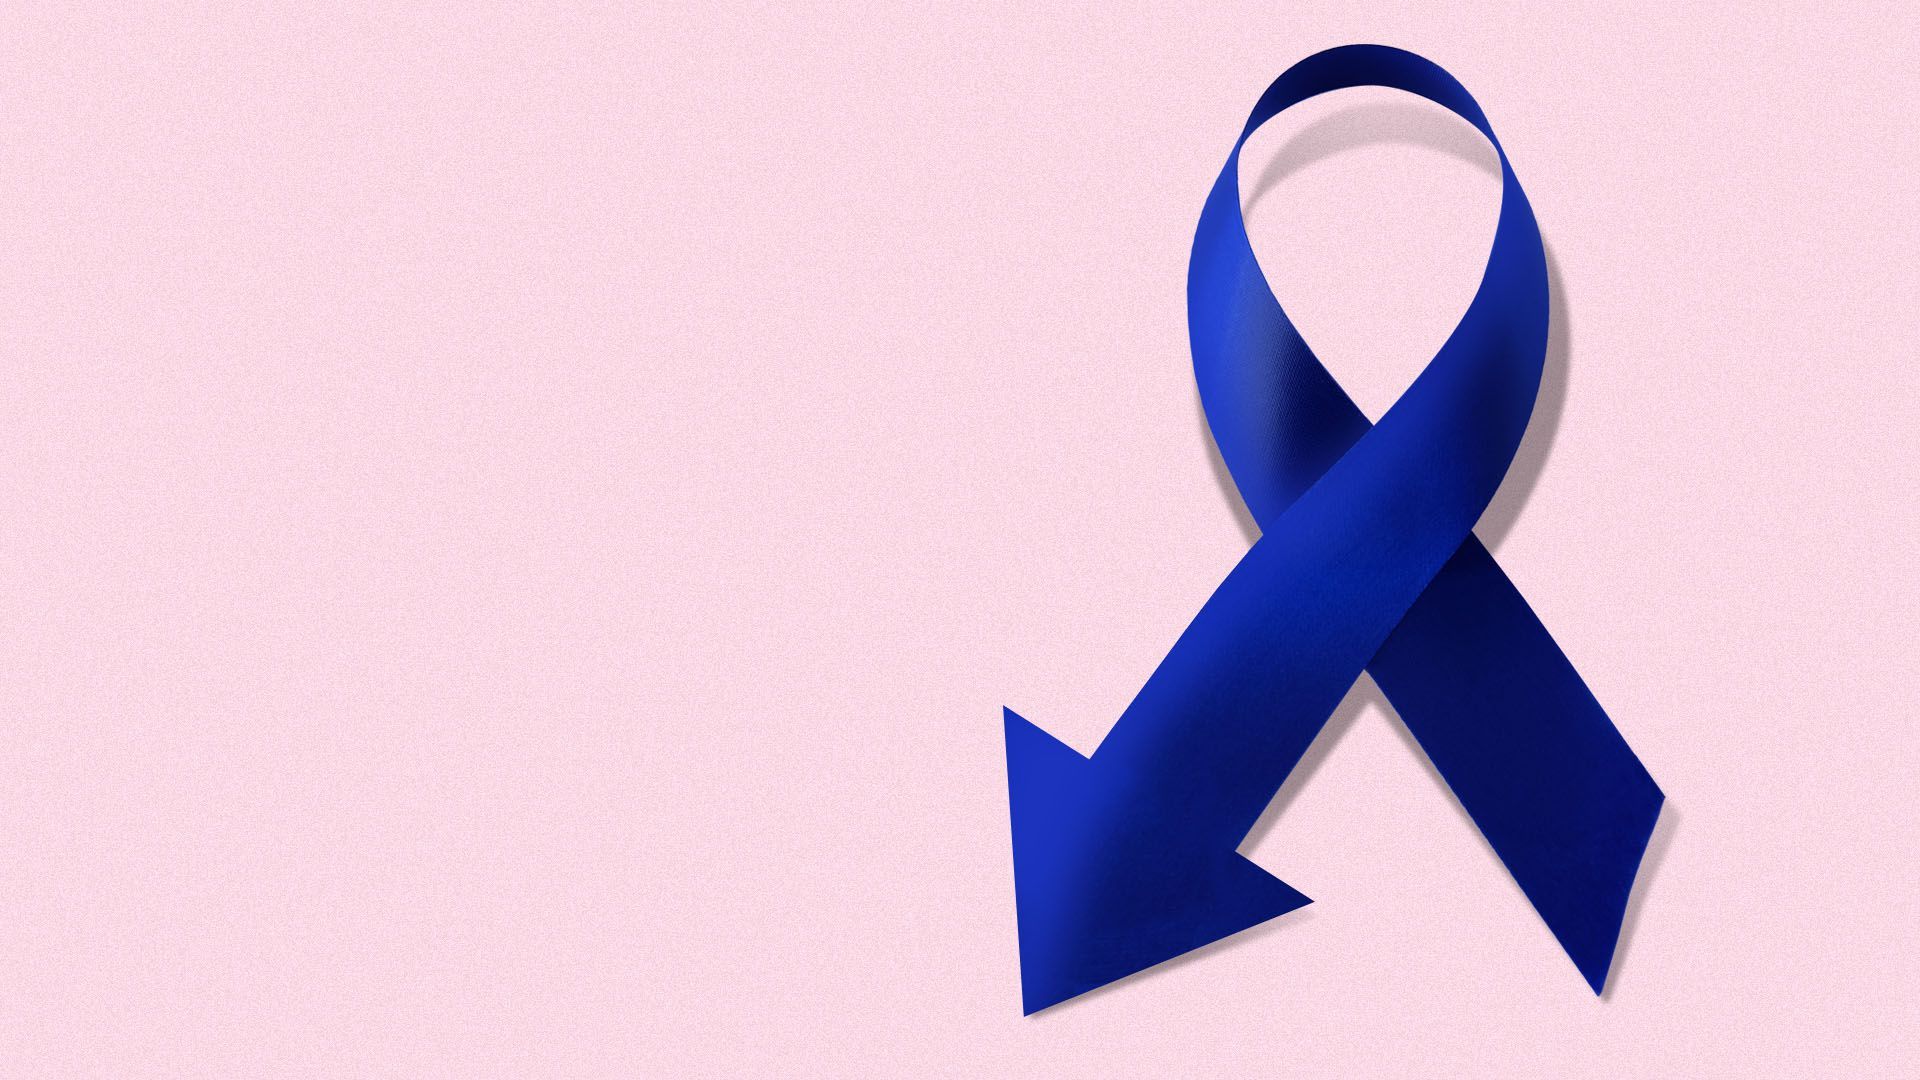 Illustration of a blue ribbon with a downward-facing arrow